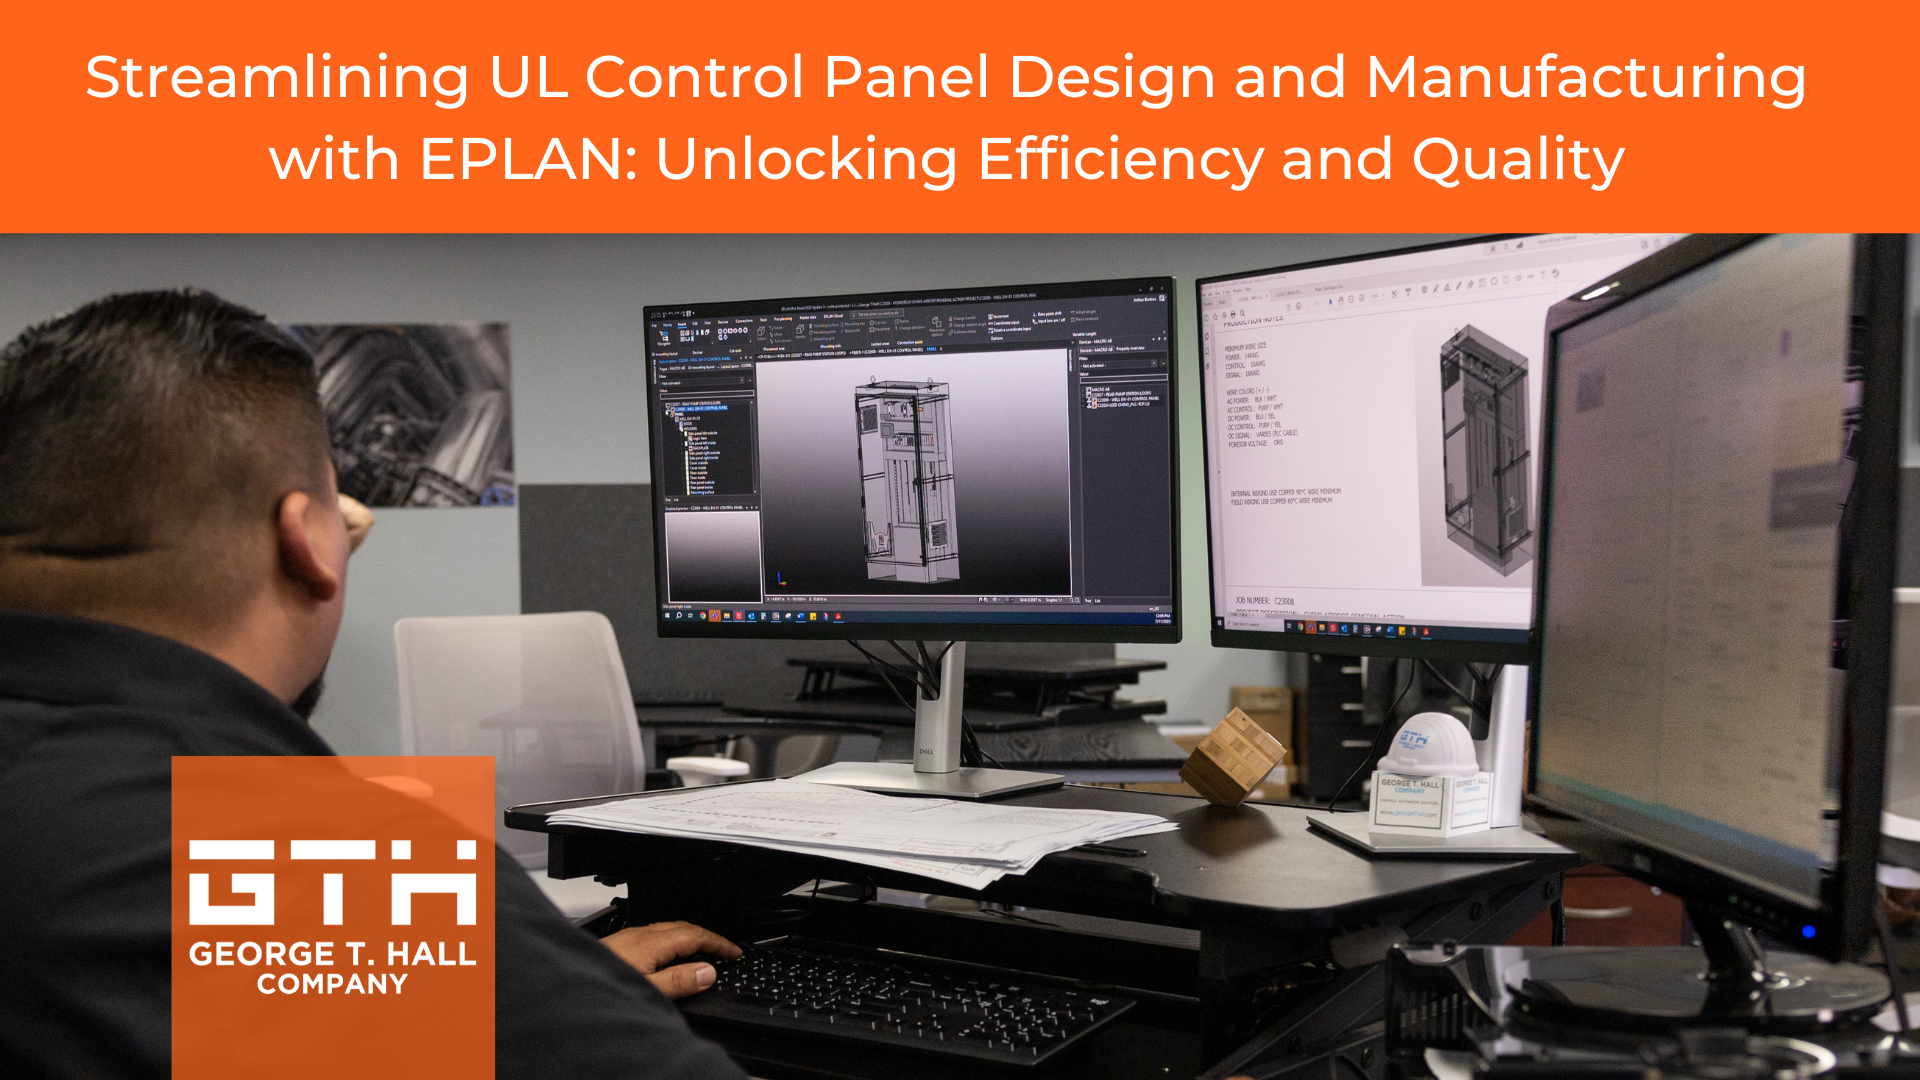 Streamlining UL Control Panel Design & Manufacturing with EPLAN: Unlocking efficiency and Quality